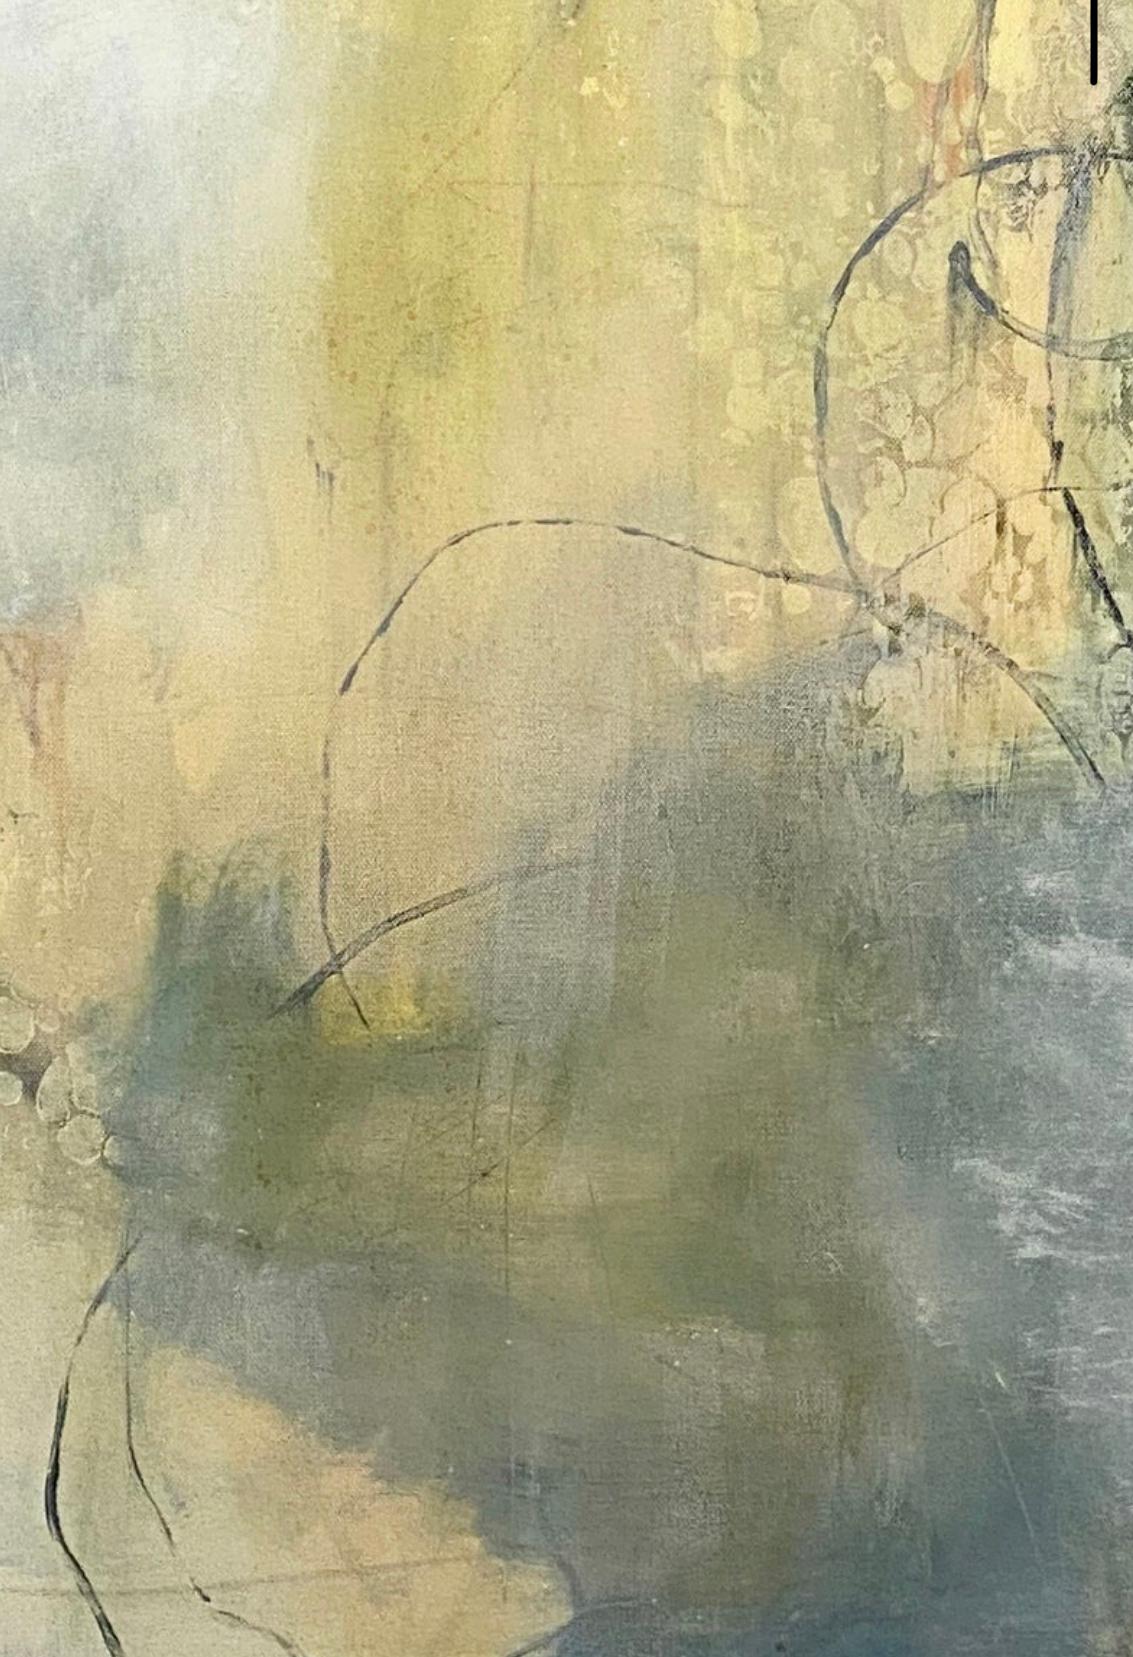 “Summer glow” 48 x 36 inches is a one-of-a-kind original, modern, landscape impressionist painting by Juanita Bellavance. In this highly expressive abstract work, Juanita combined yellow, blue, white and green for an ethereal essence. In the nature